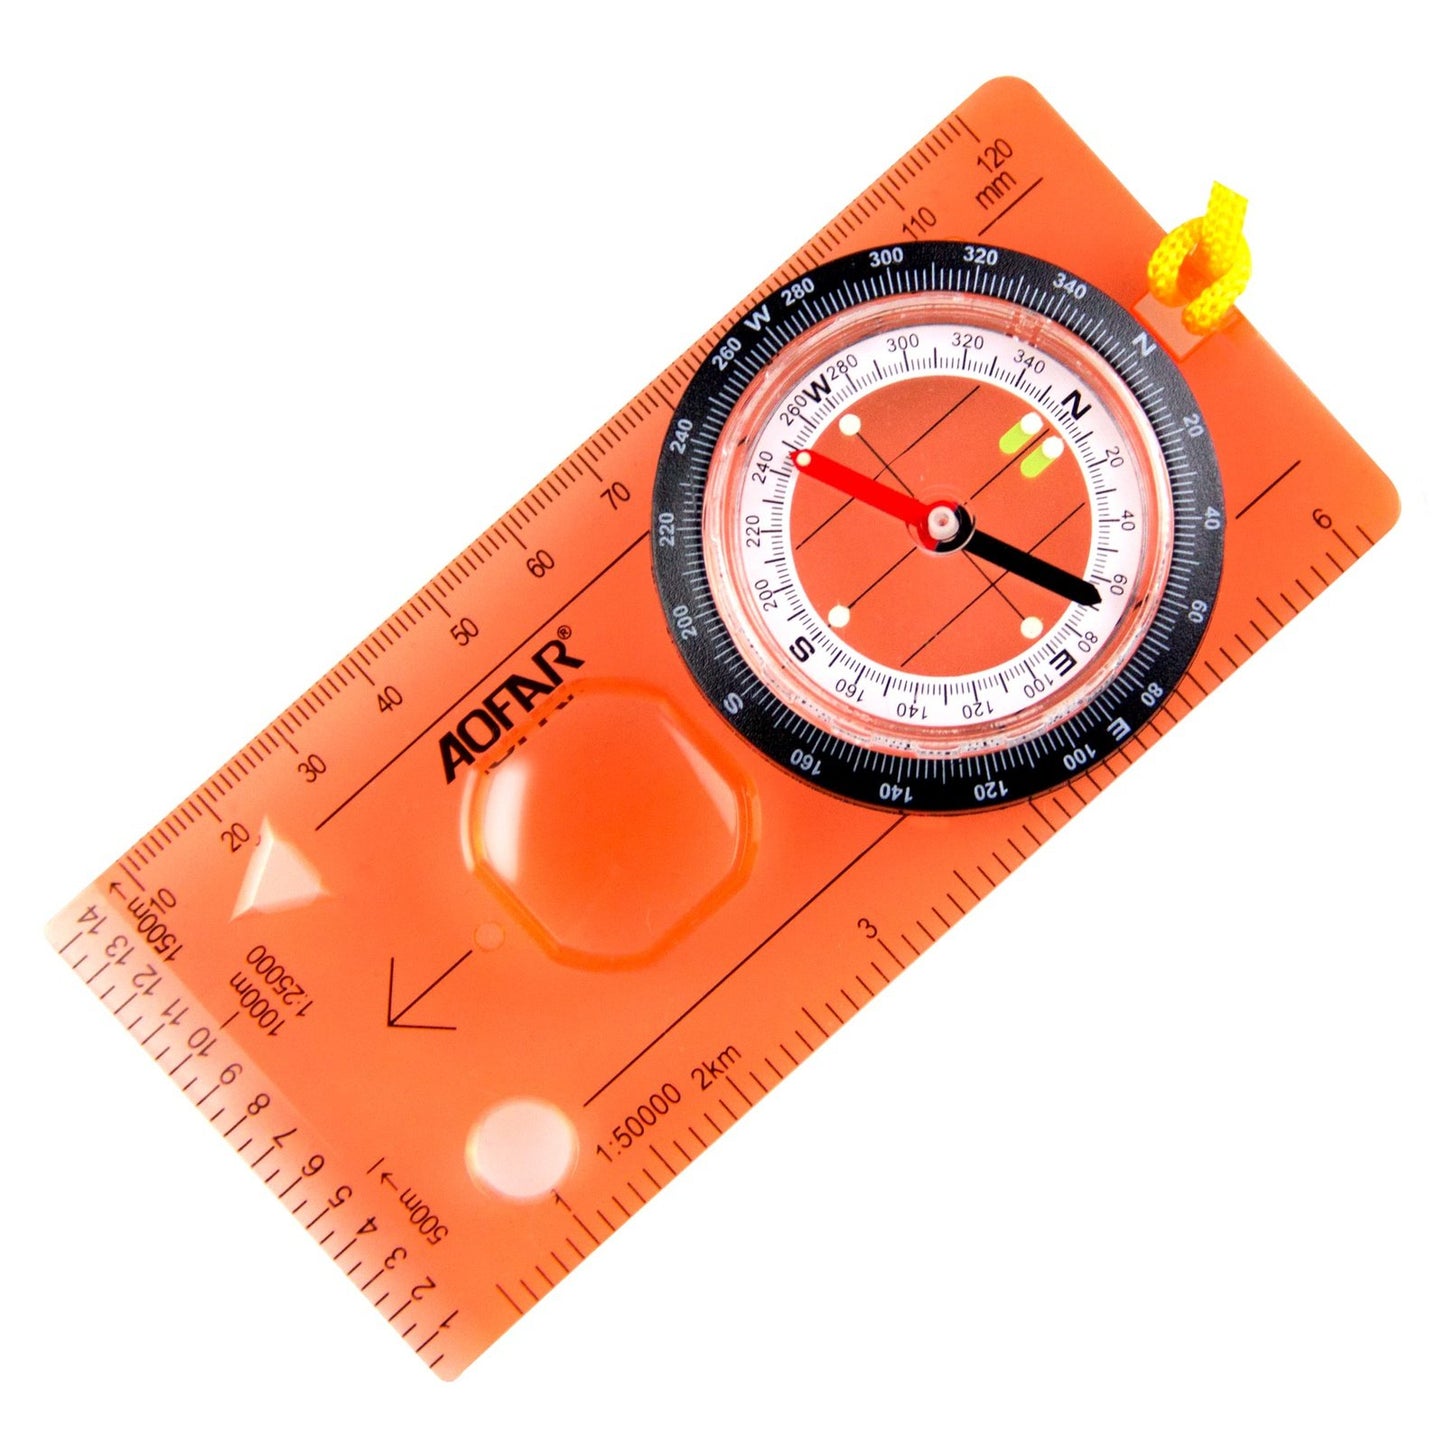  Military Matter Compass For Hiking , Boy Scout Compass For Kids - Professional Field Compass For Map Reading ,Navigation And Survival Lightweight - Mini Camping Compass | The Best CS Tactical Clothing Store